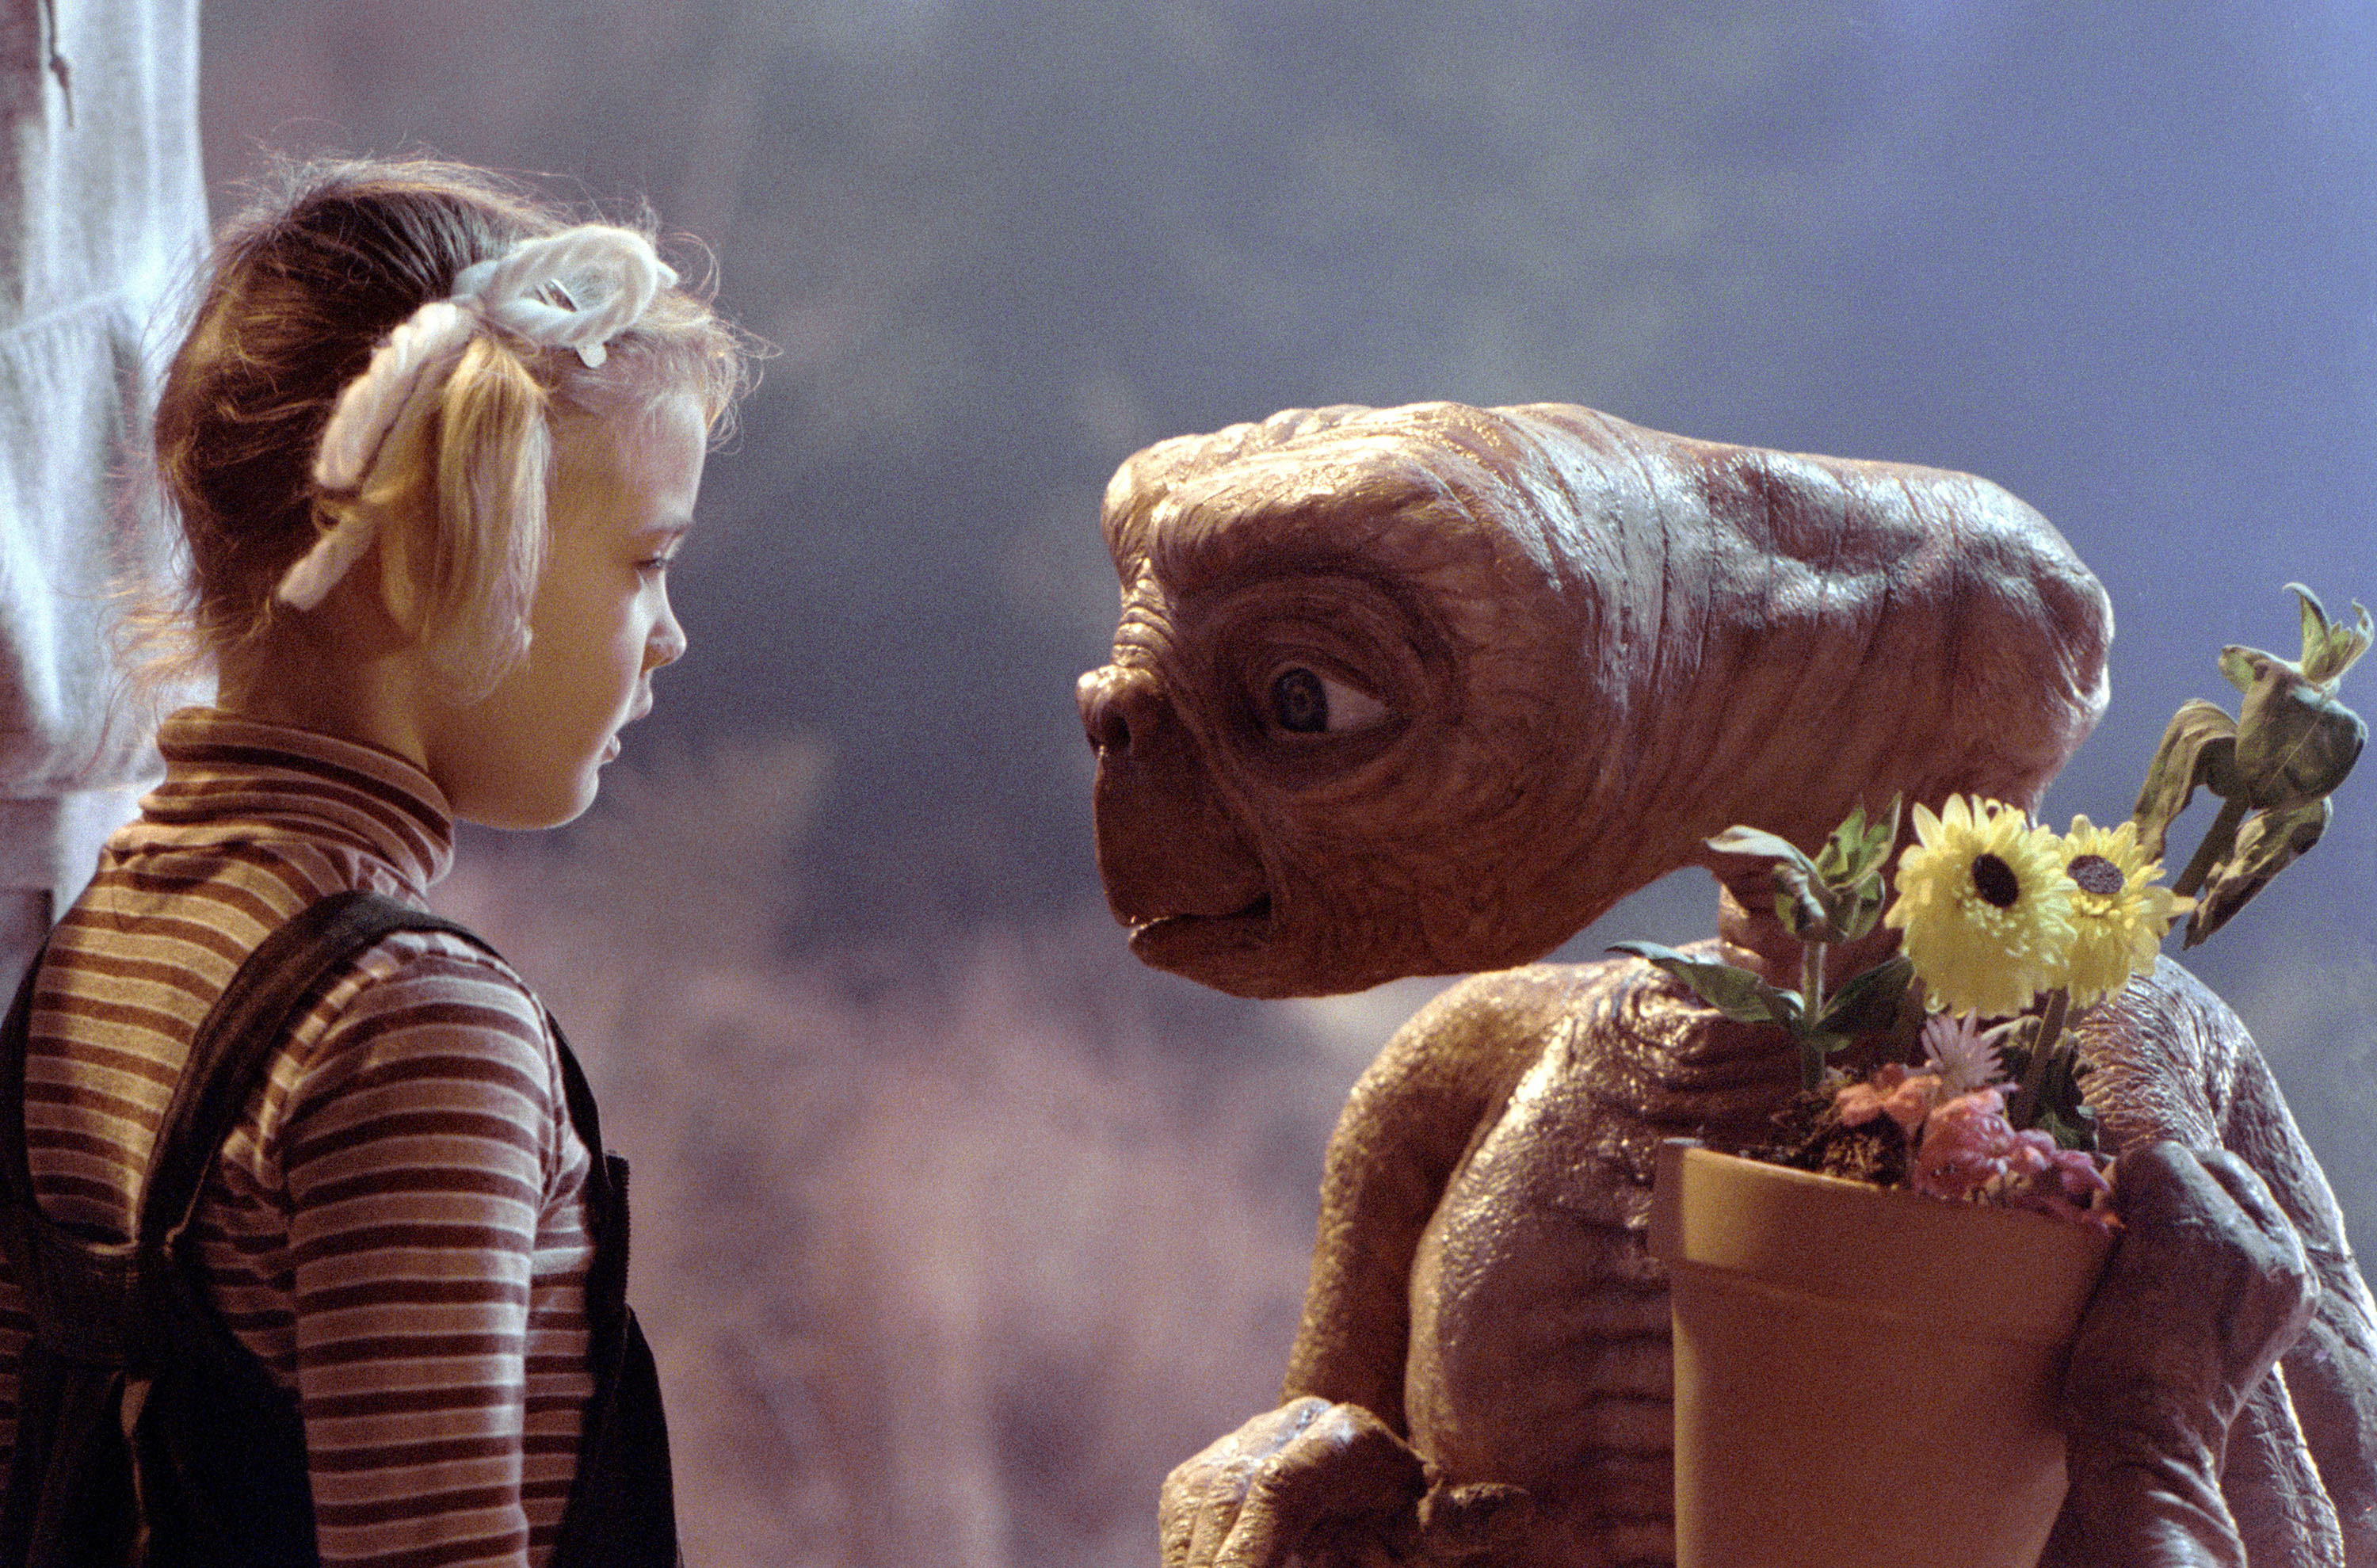 Drew Barrymore stands in front of E.T., who is holding a pot of flowers